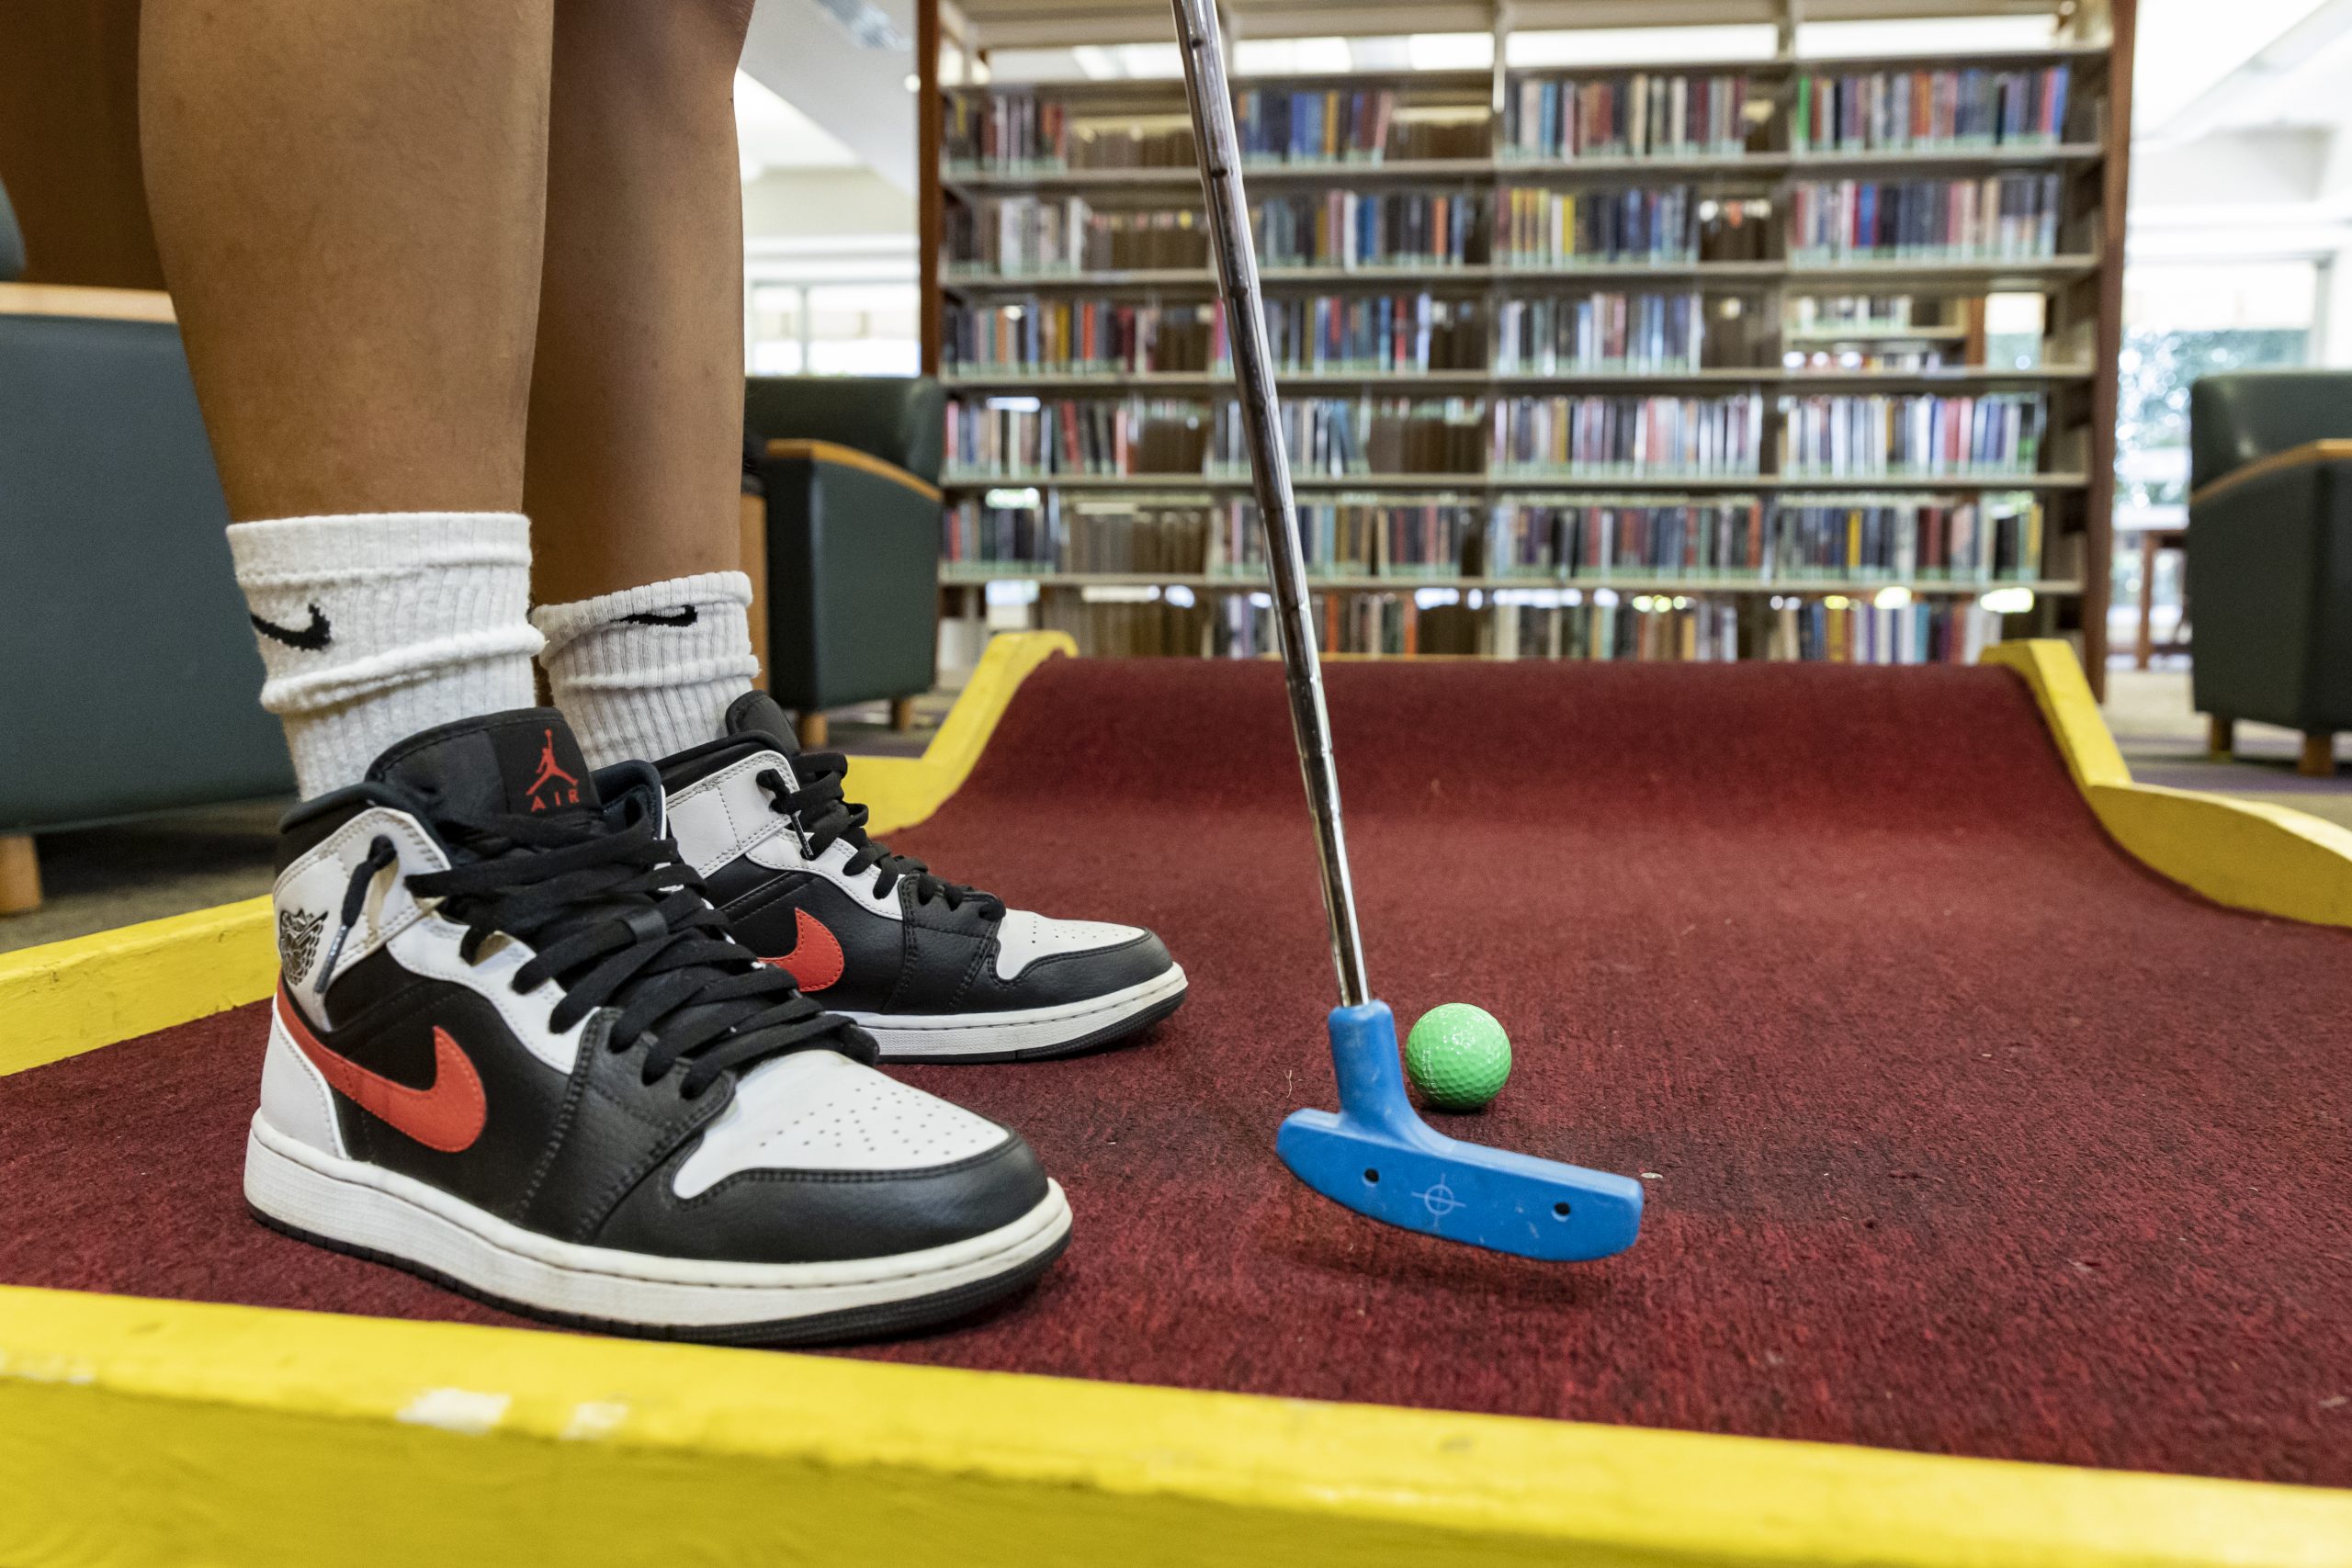 Close up of air jordan sneakers and a golf putter hitting a golf ball in mini golf